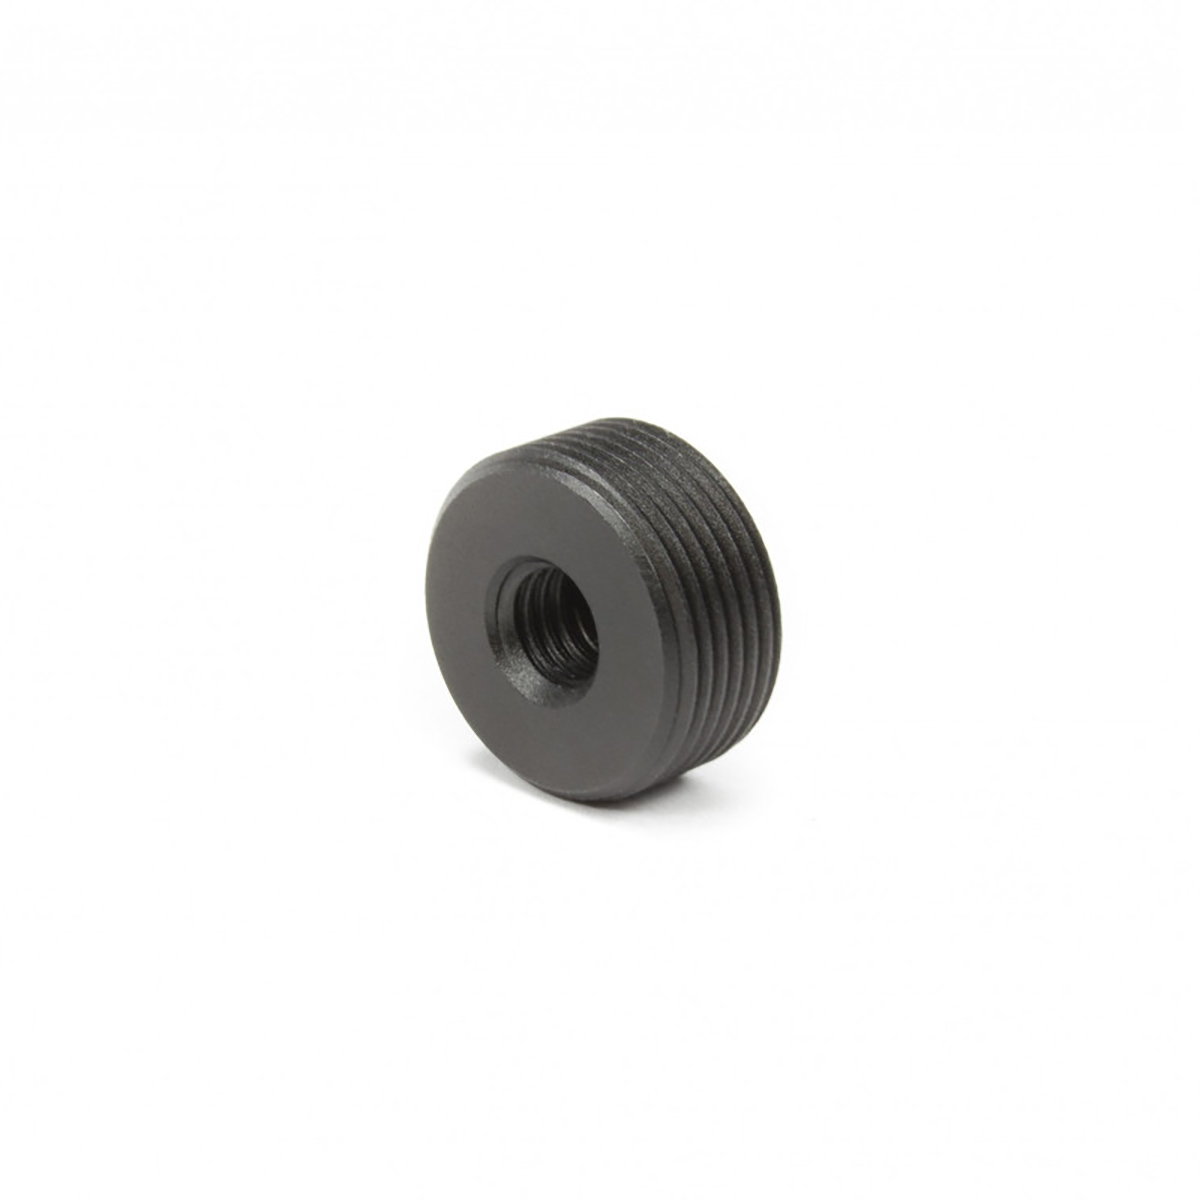 9.Solutions 3/8"-16 Thread-on Quick Mount Receiver